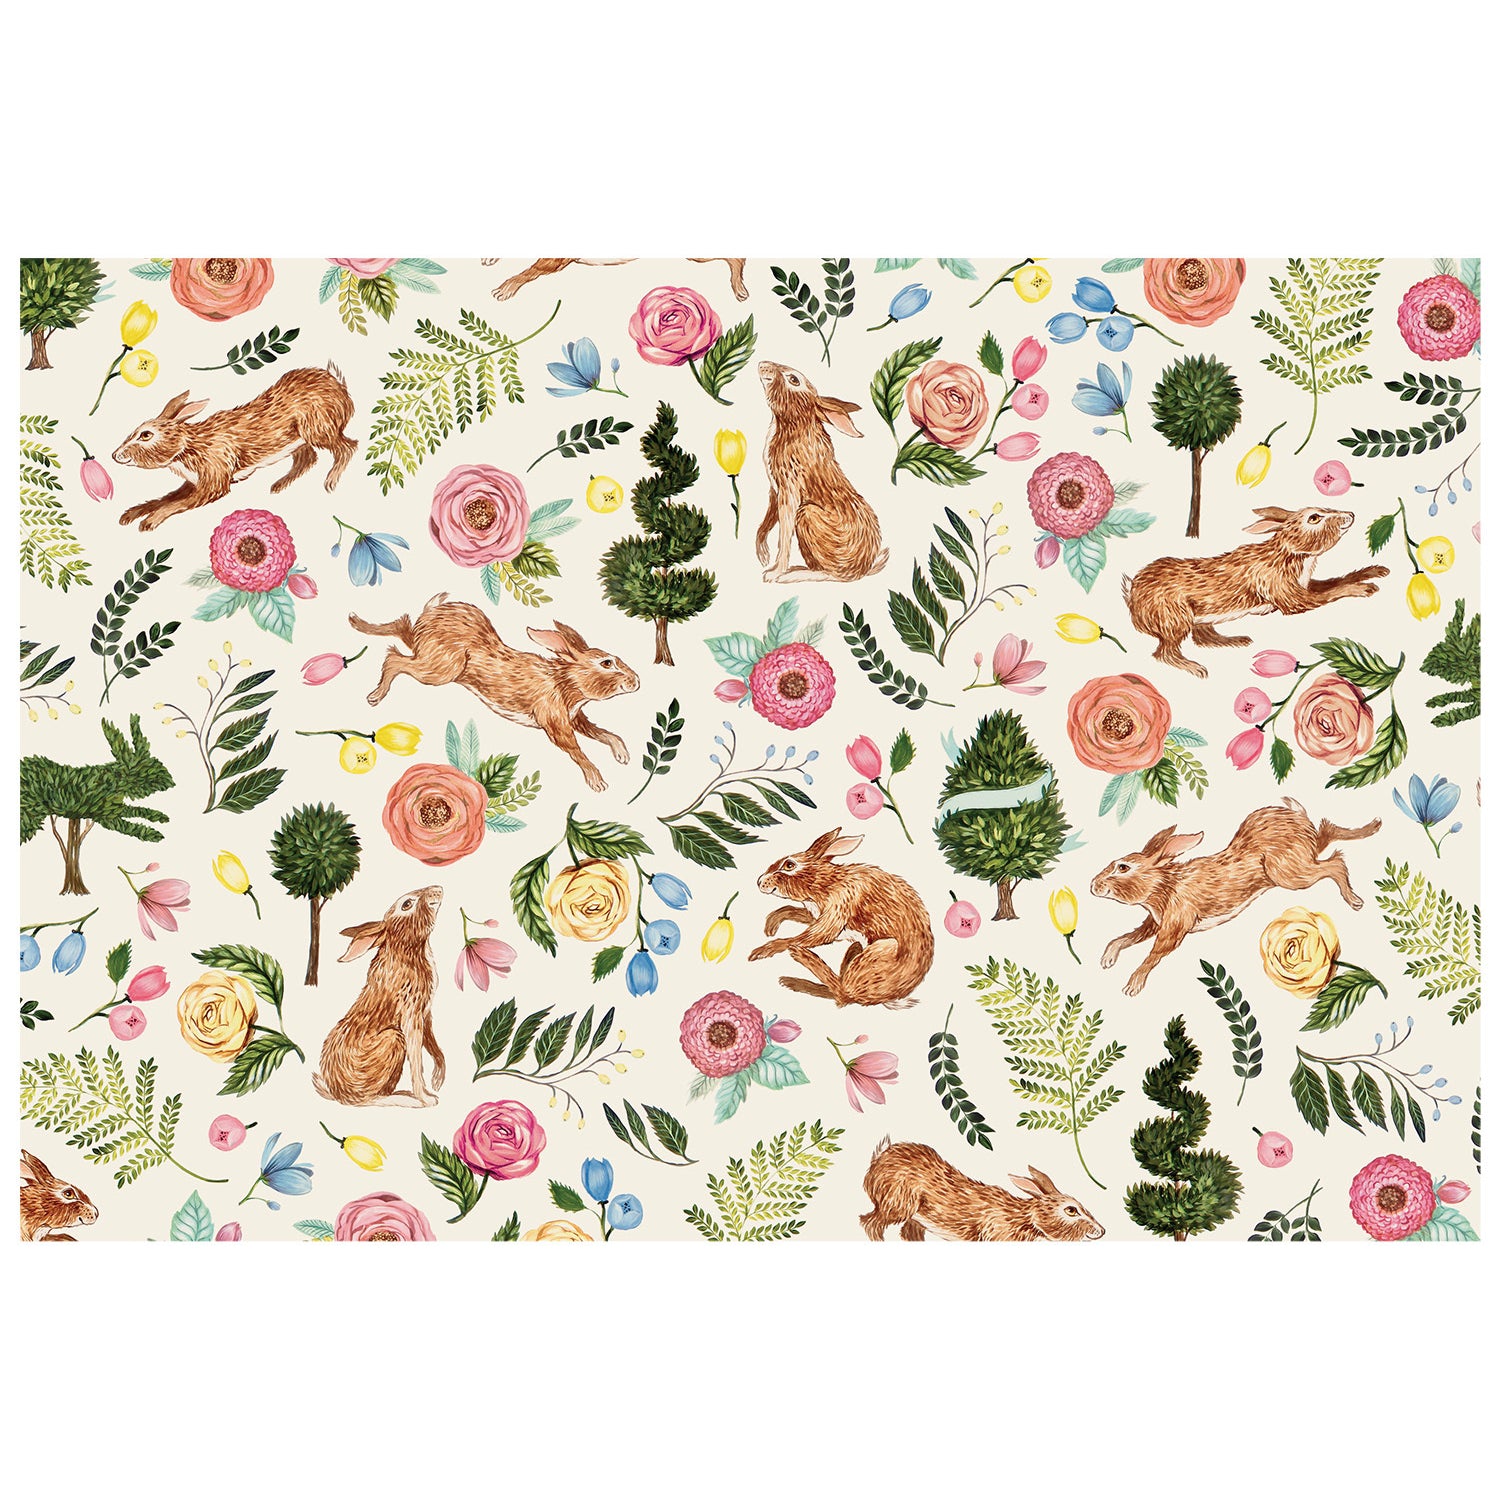 An illustrated scatter of brown bunnies,  pink, blue and yellow flowers and foliage, and rich green topiary over a white background.